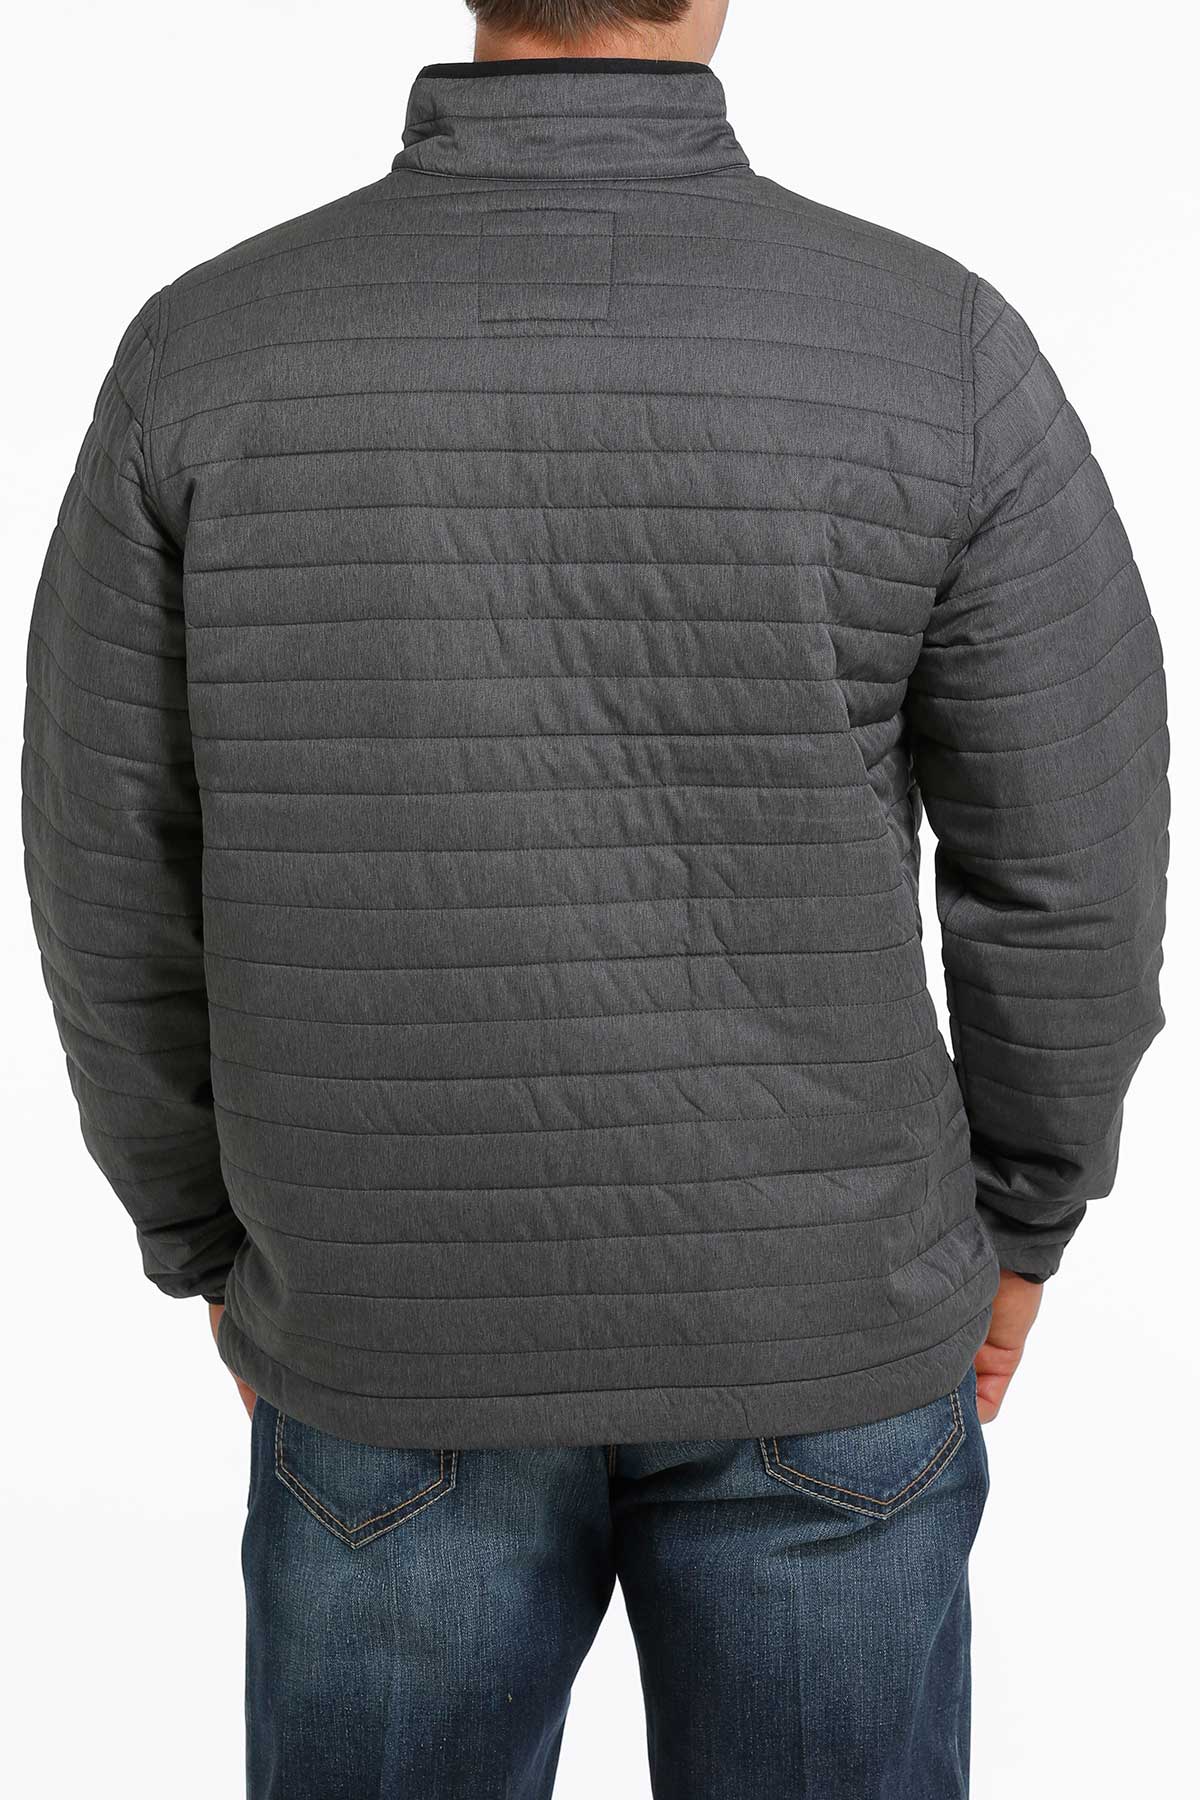 Cinch Men's Midweight Quilted Down Jacket